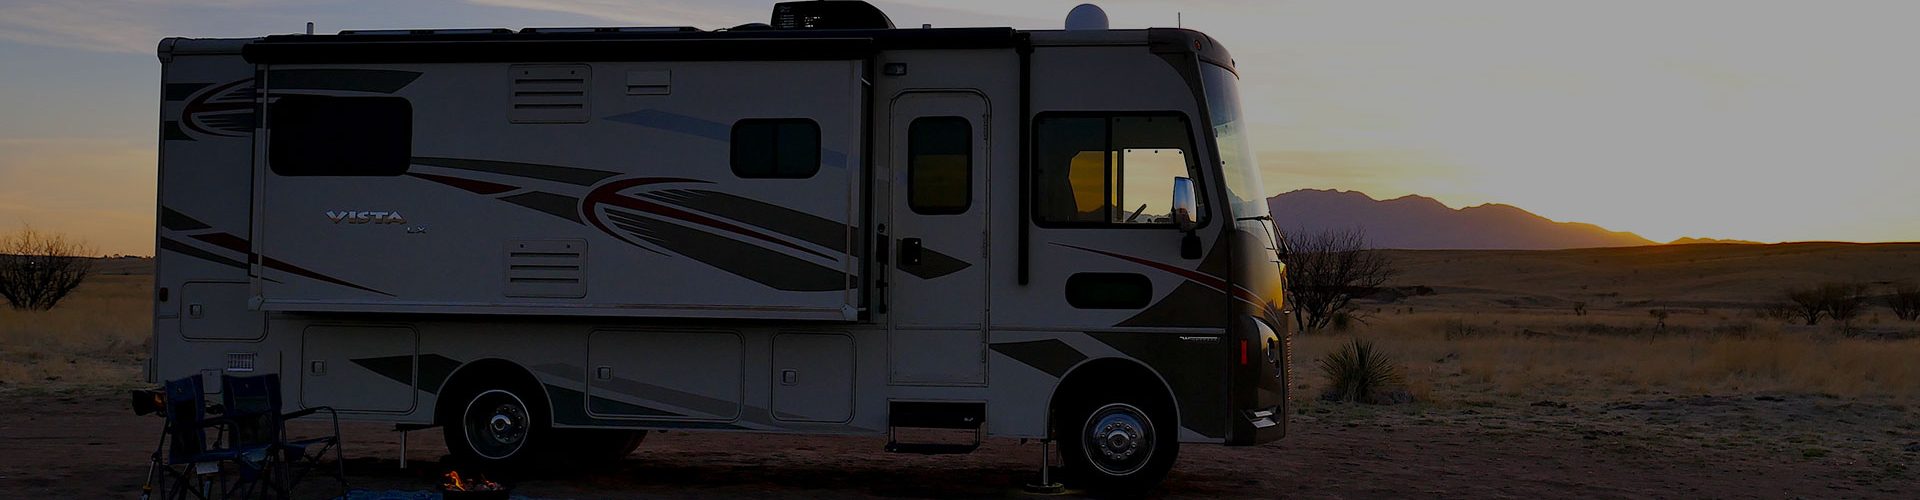 RV SnapPad Announces New HWH Product Line